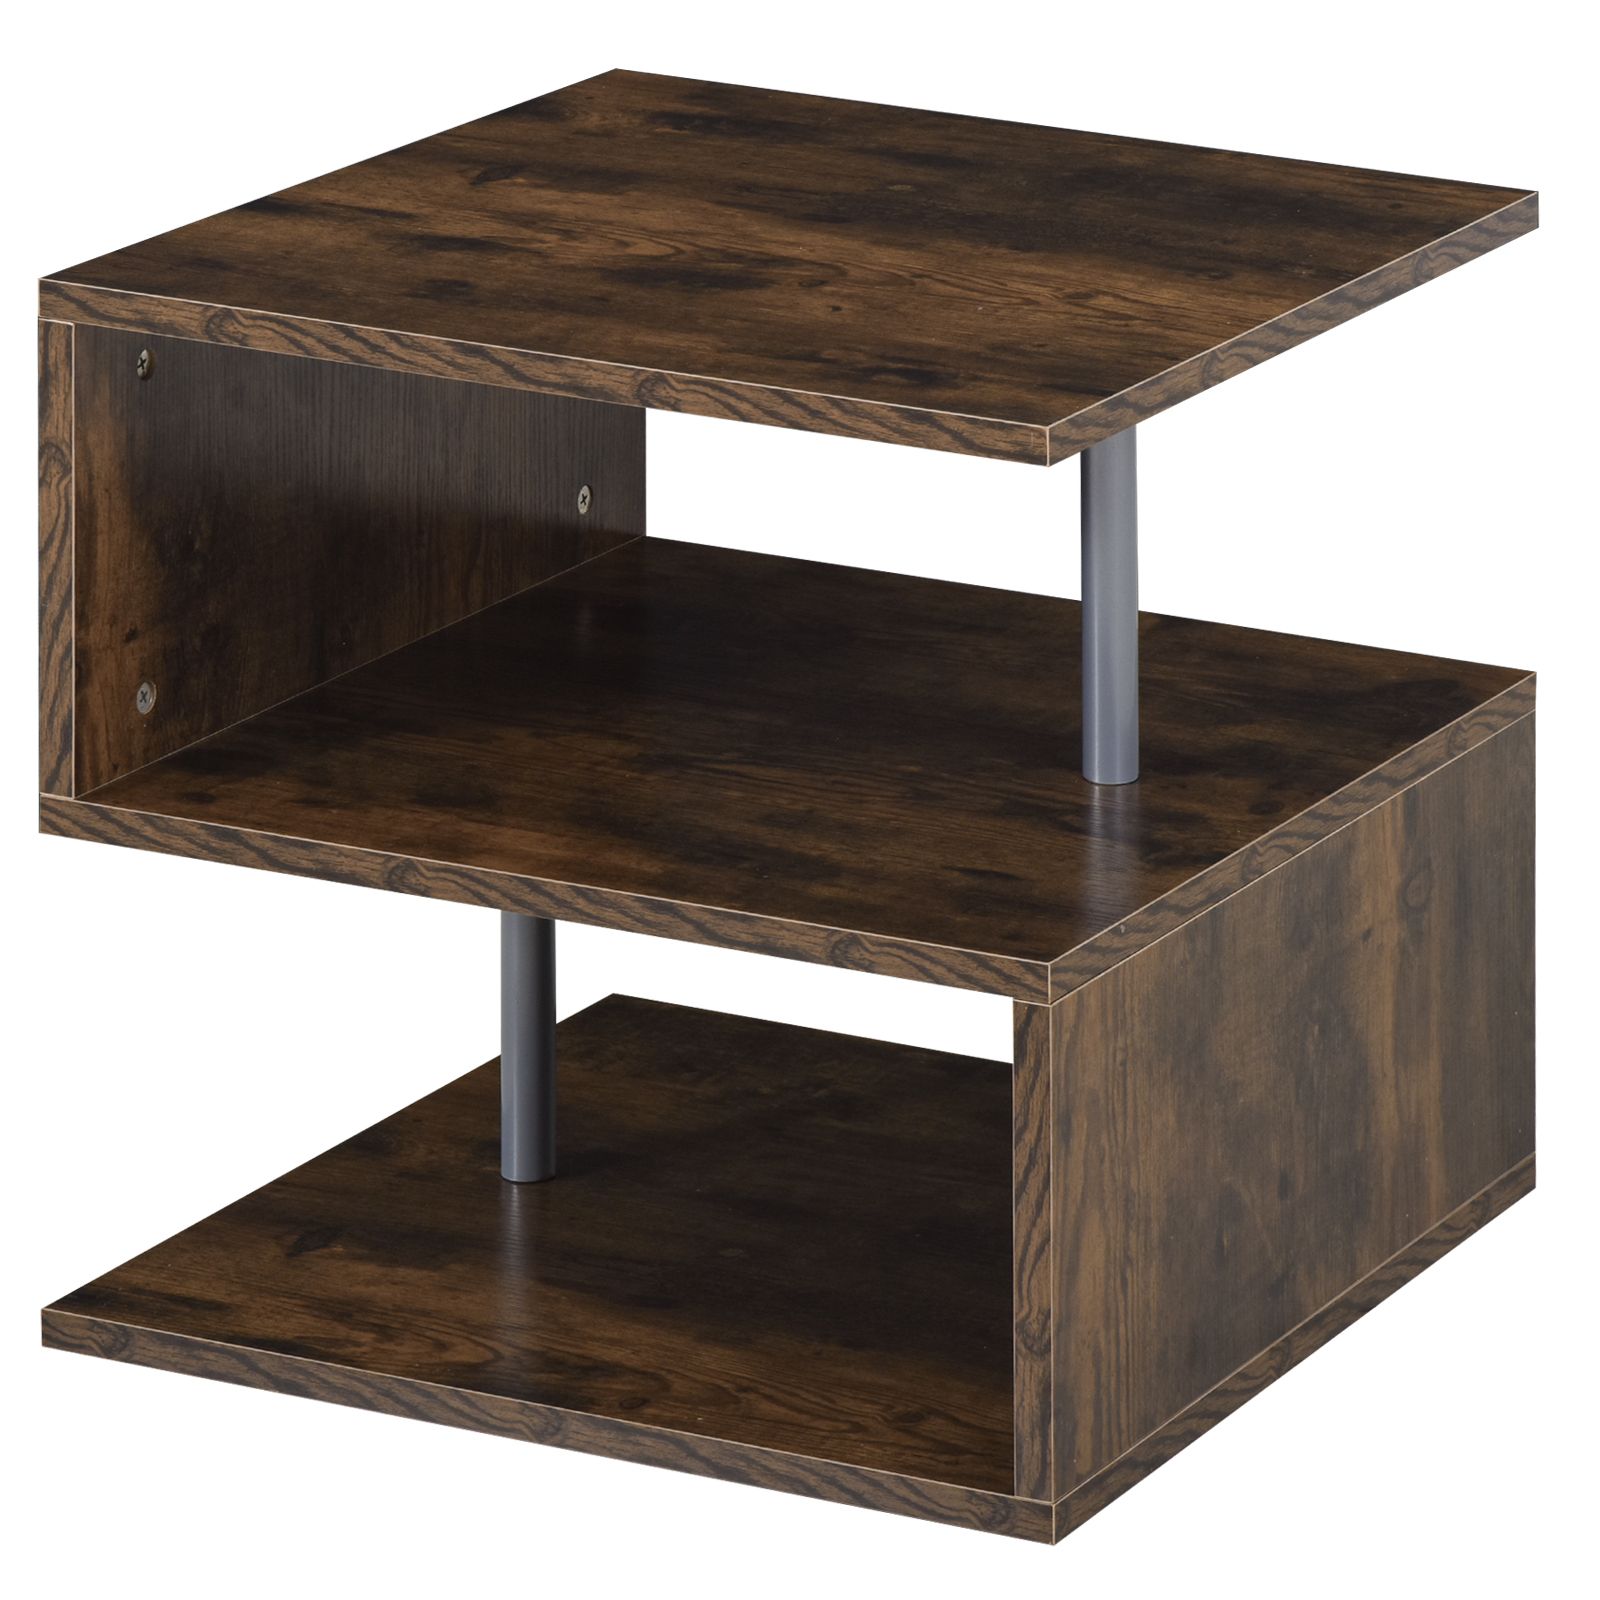 Homcom Coffee End Table S Shape 2 Tier Storage Shelves Organizer For Wood Coffee Tables With 2 Tier Storage (View 11 of 20)